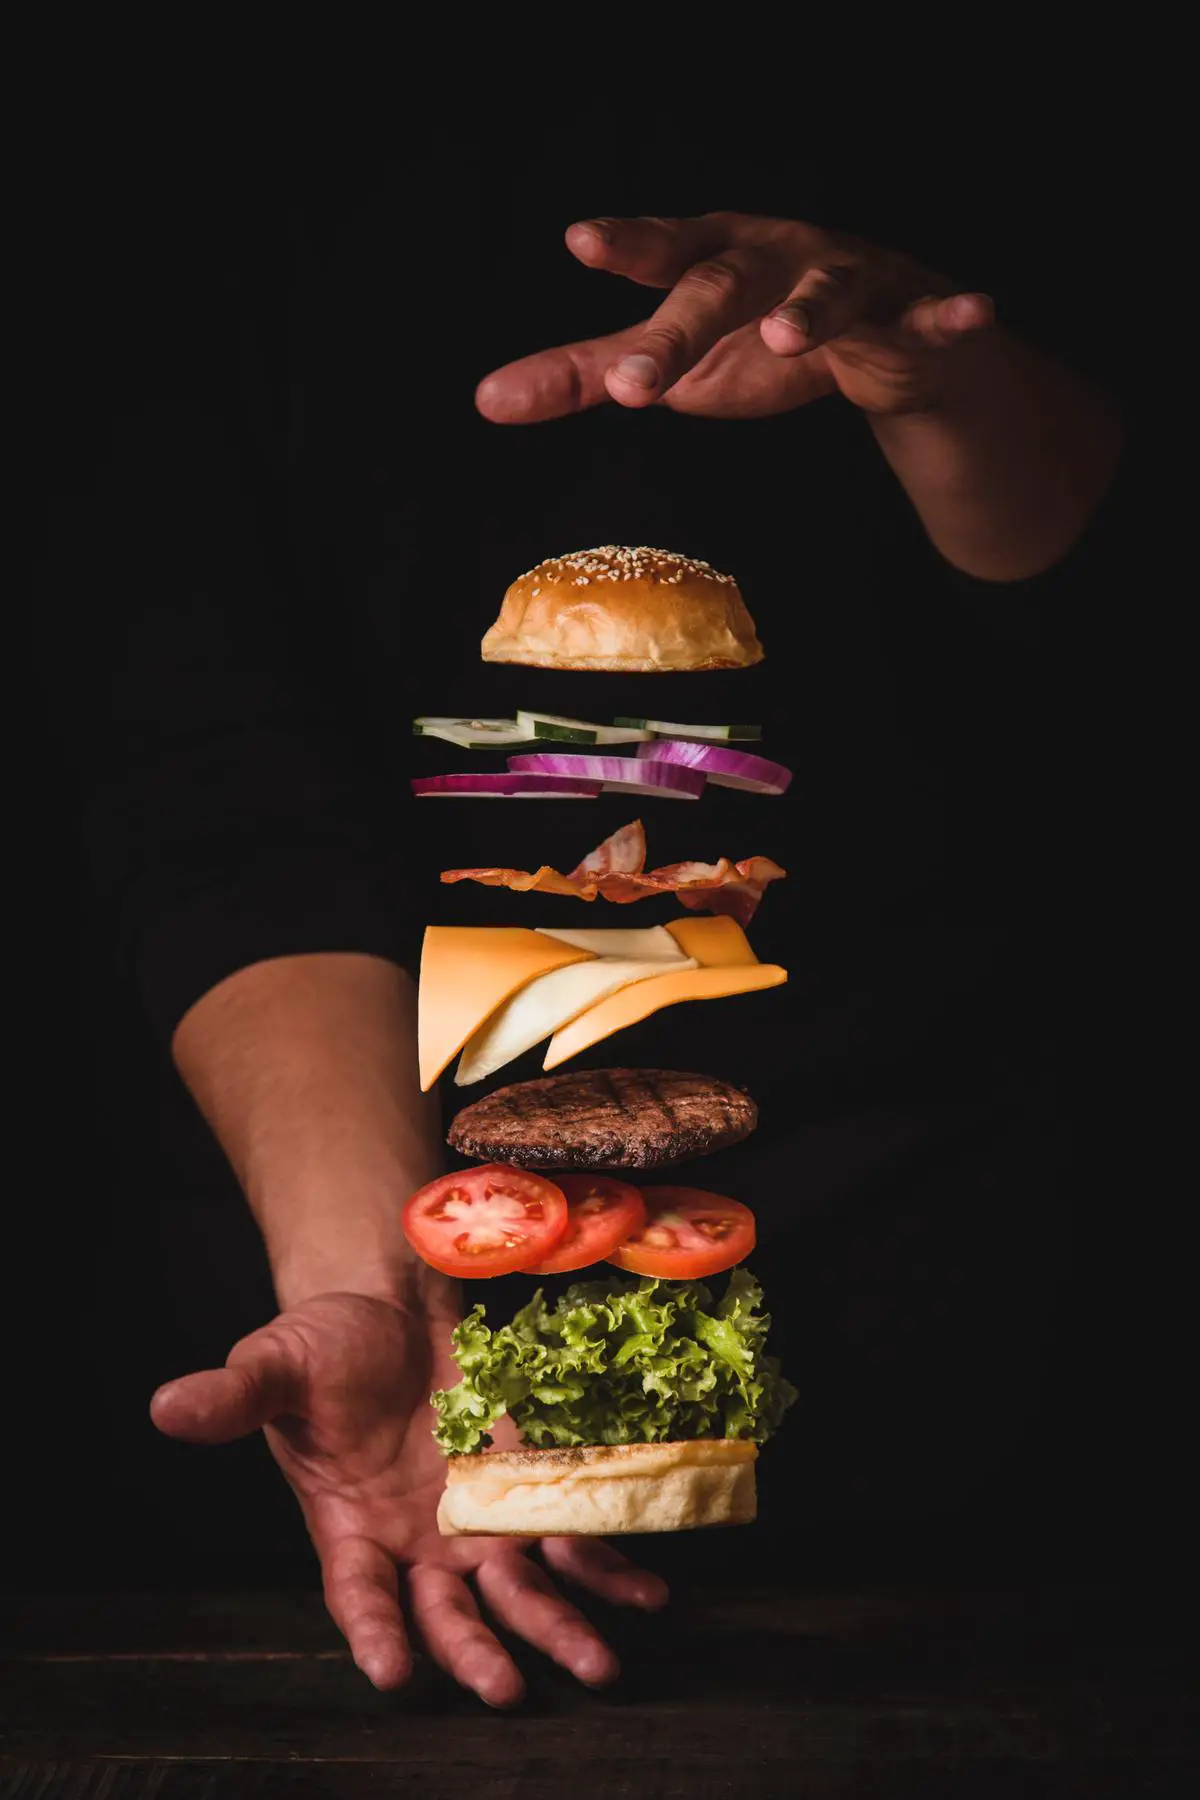 A mouth-watering image of a Big Tasty with Bacon burger, showcasing its beautiful layers of ingredients and capturing its essence as a delicious, indulgent treat.